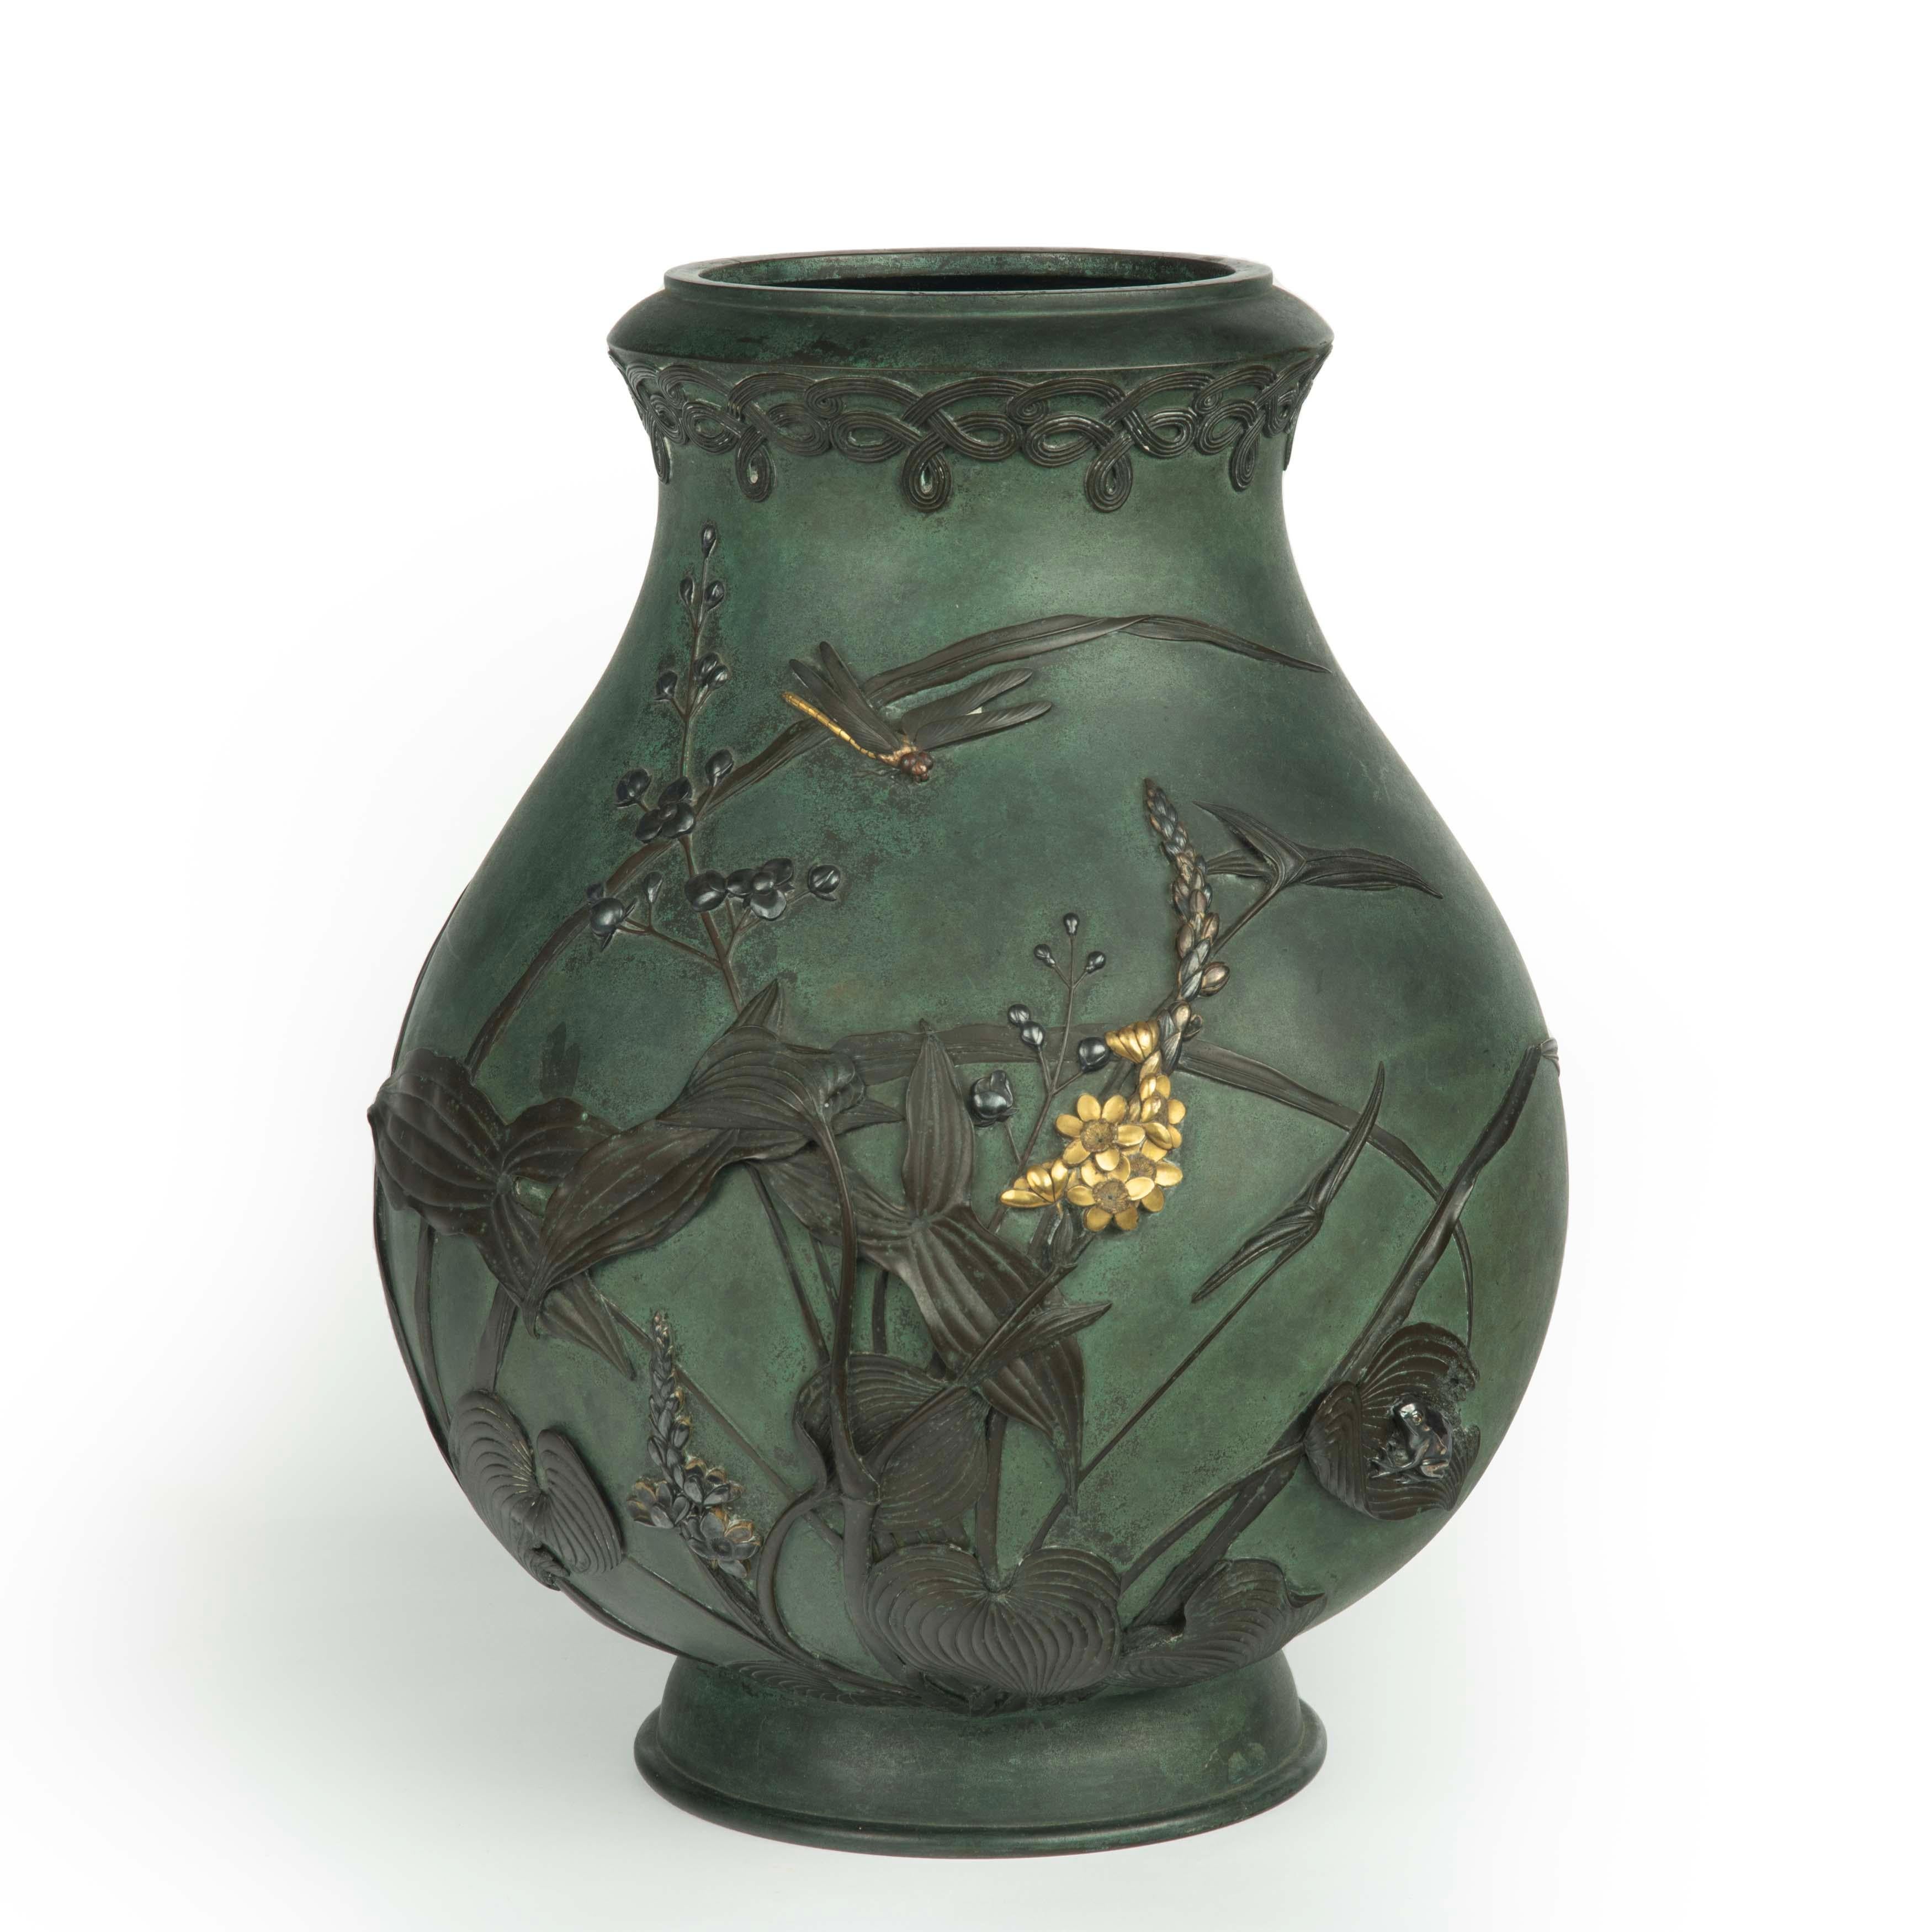 A Meiji period patinated bronze vase by Kiryu Kosho Kaisha, the baluster body applied with gold, silver, bronze and copper designs of bogbean and arrowhead plants with a frog, dragonfly and butterfly all on a green ground.

Literature: Toyojiro